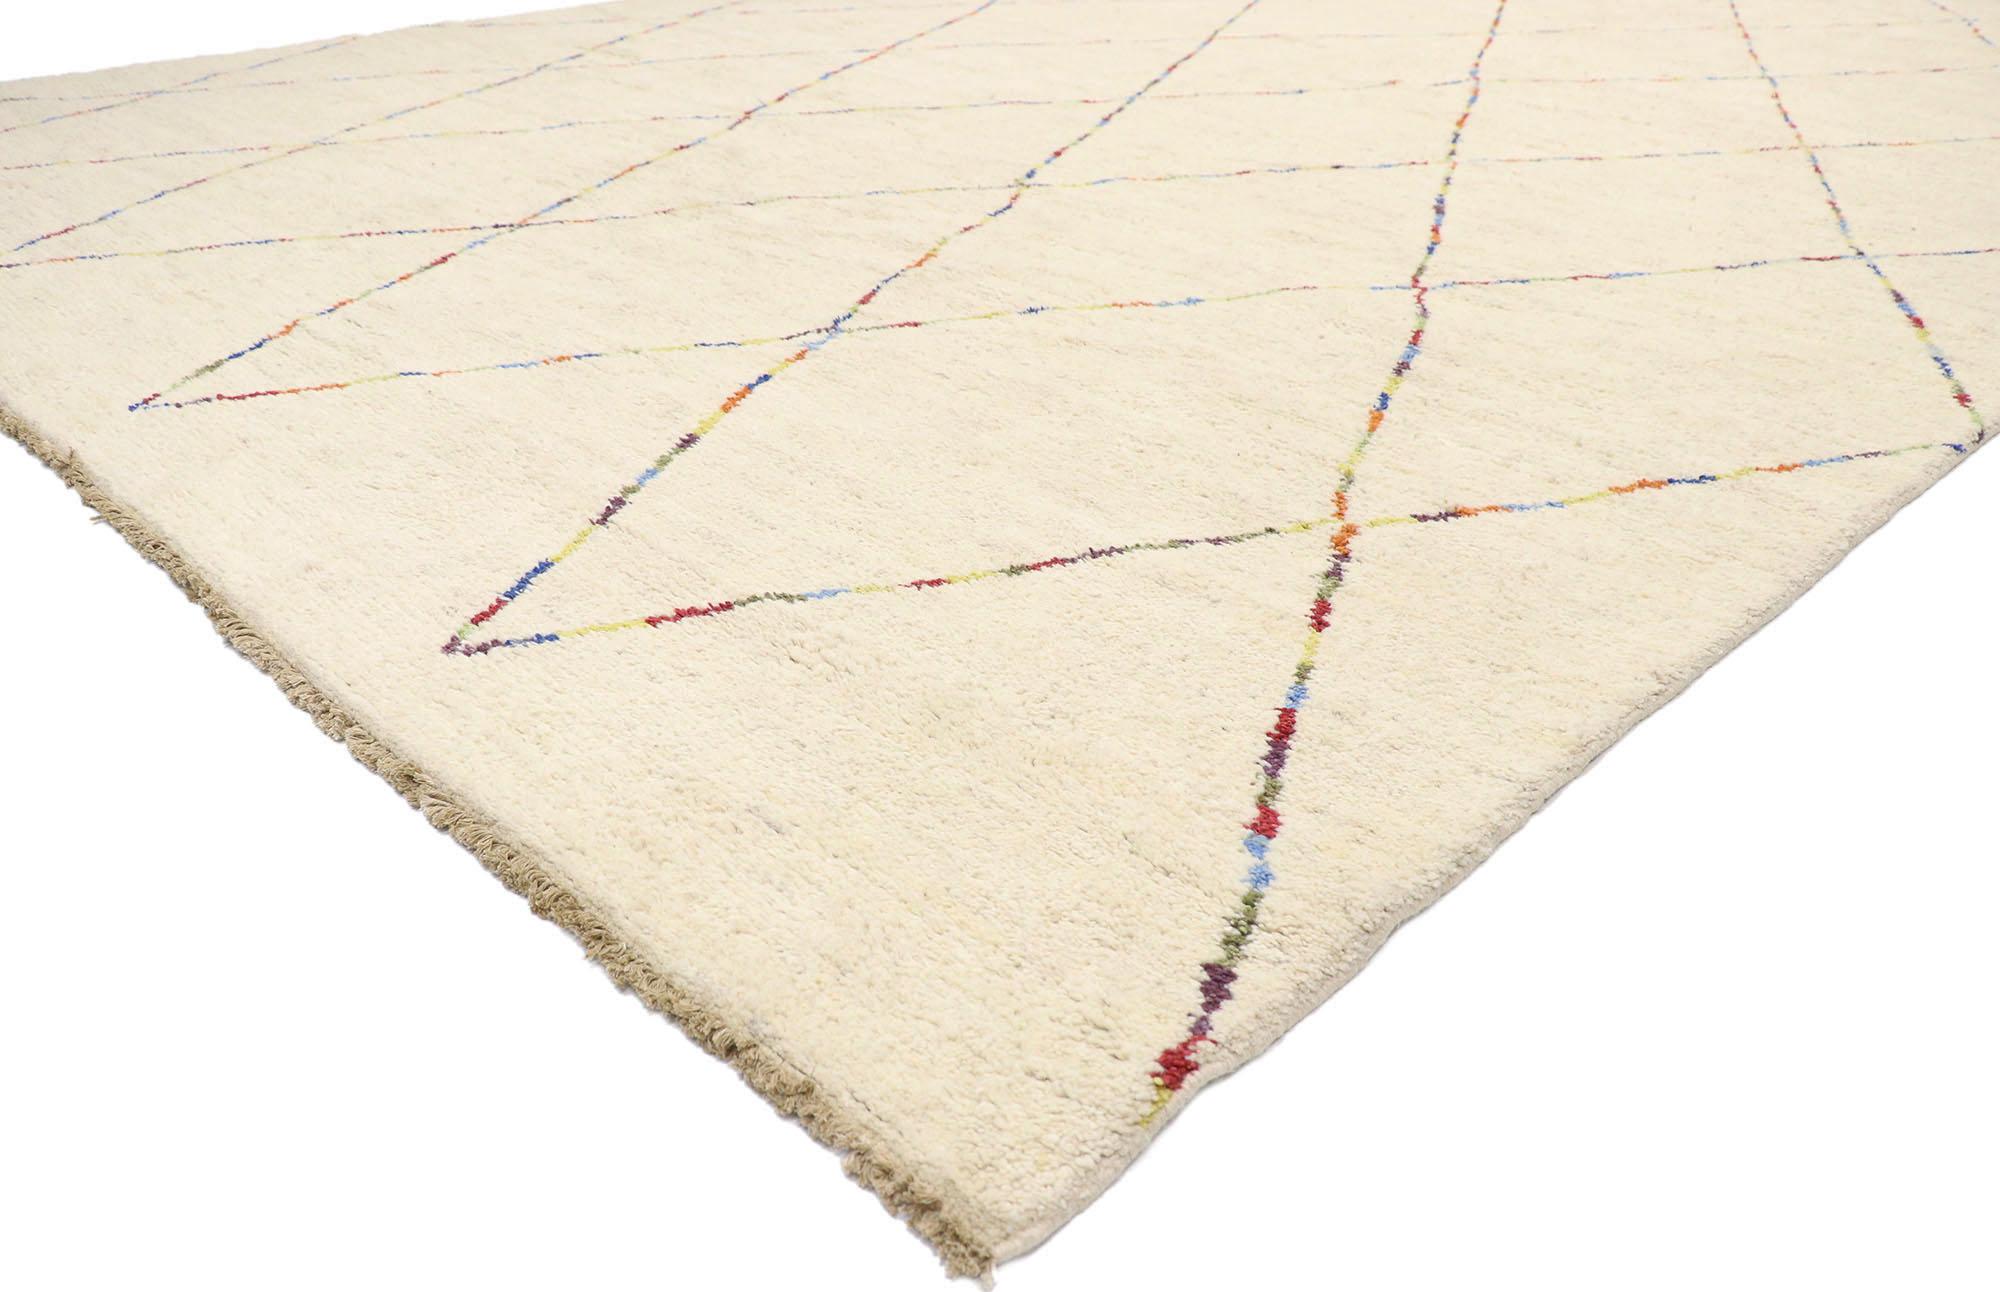 80436 Oversized Moroccan Rug - Hospitality Sized Carpet, 12'03 x 19'11. 
Minimalist Bohemian meets colorfully curated in this hand knotted wool oversized Moroccan rug. The intricate diamond silhouette and happy hues woven into this piece work